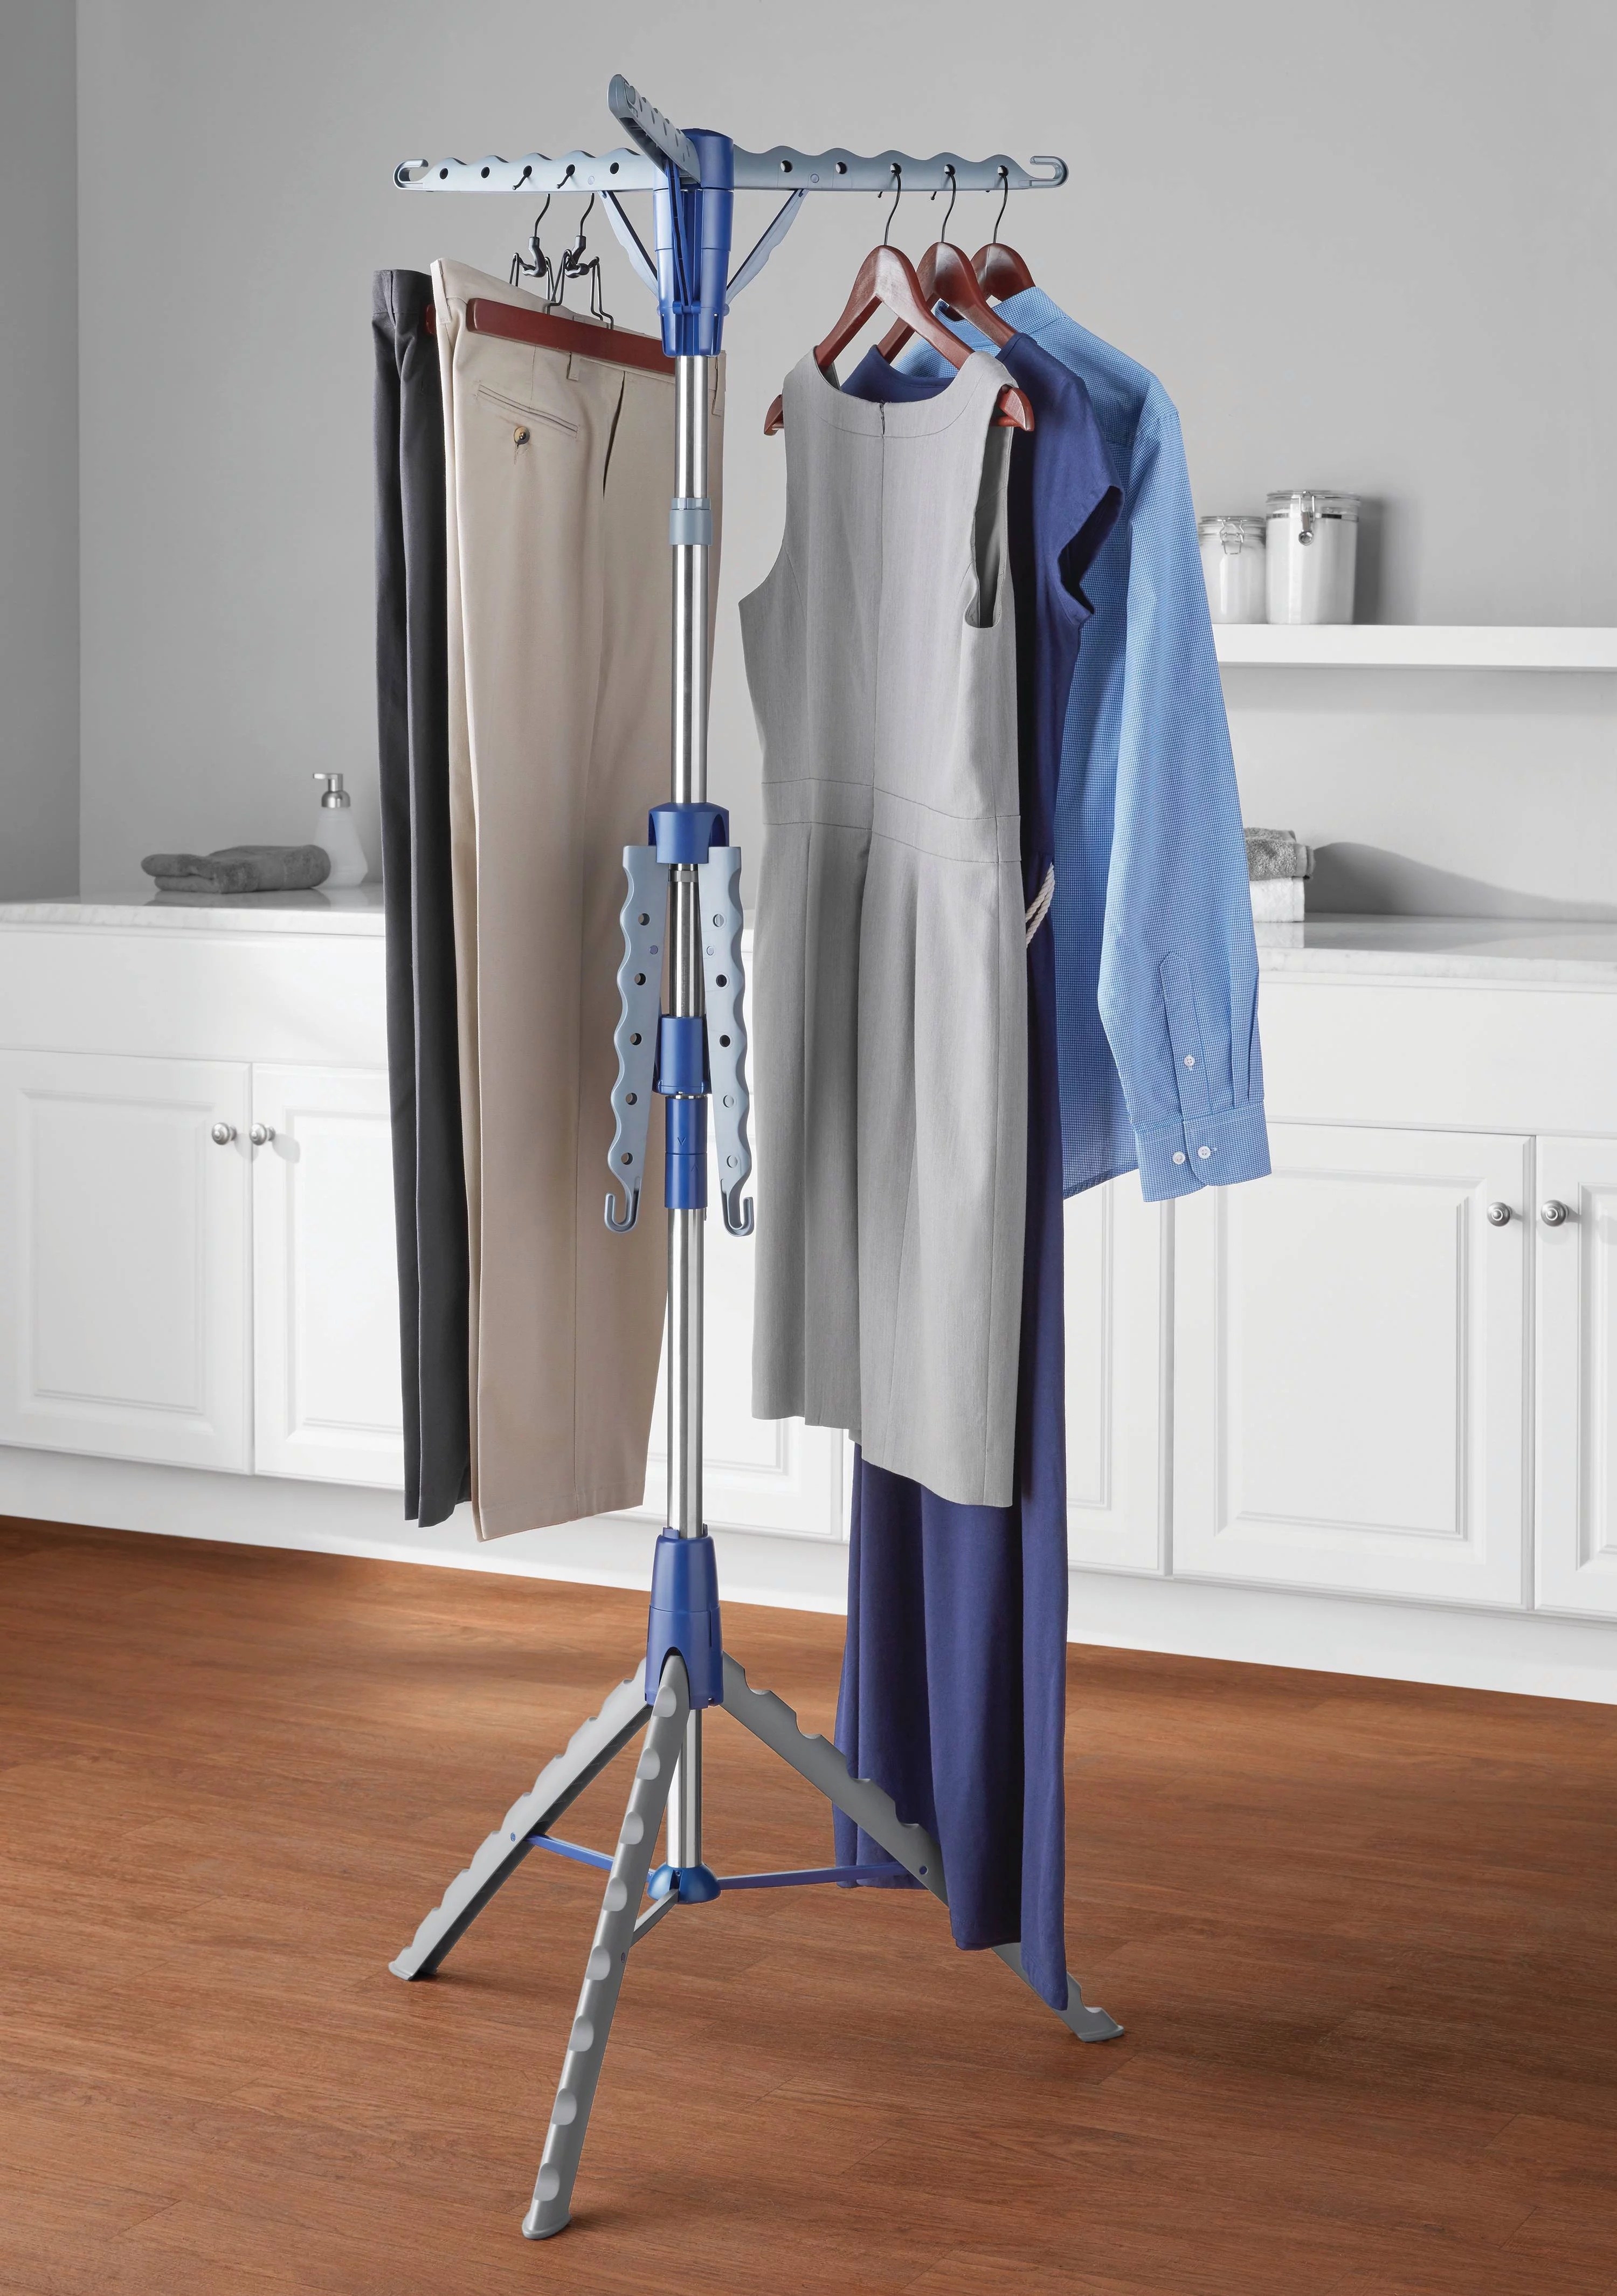 a blue and gray drying rack on a hardwood floor holding plants and dresses